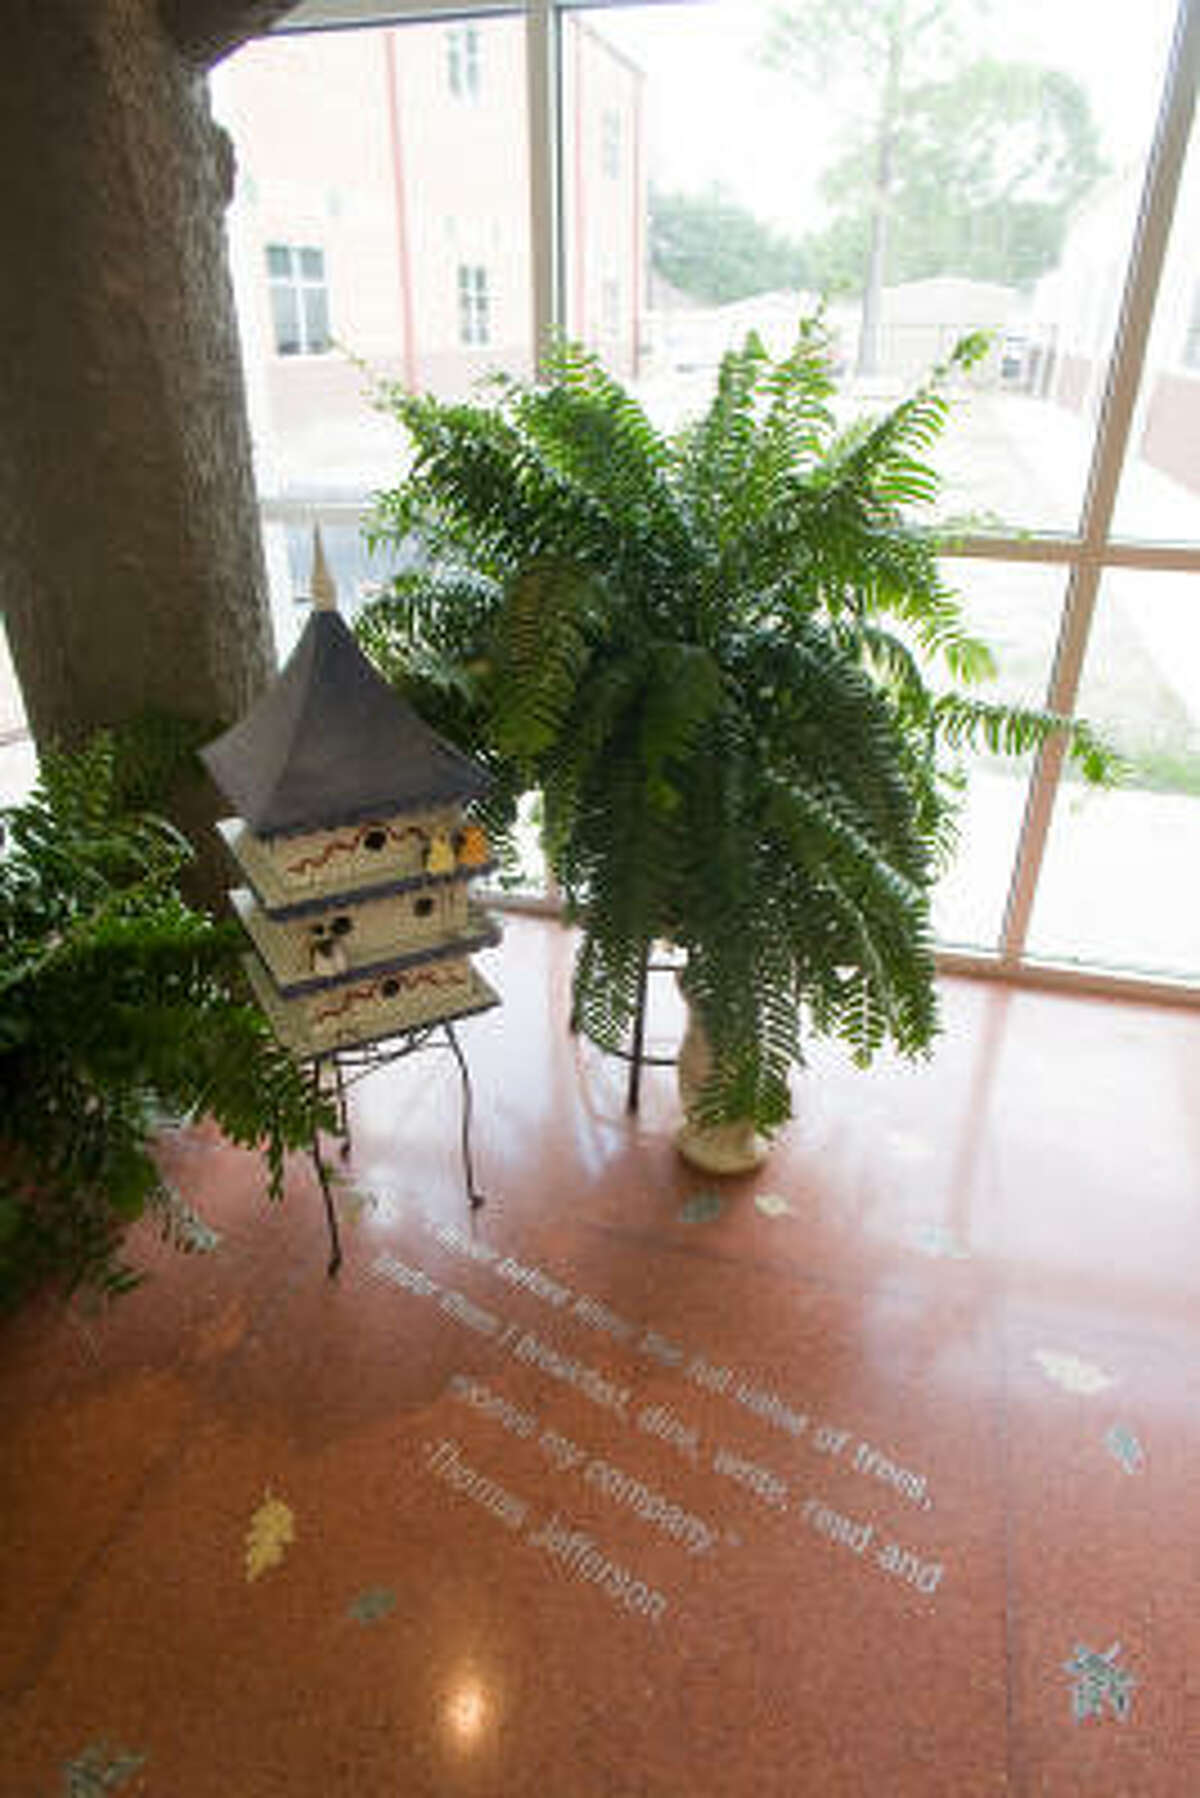 The nature/sylvan motif carries throughout the new Walnut Bend Elementary School building. This artificial treetrunk, with birdhouse and plants, frames a quotation about trees from Thomas Jefferson.